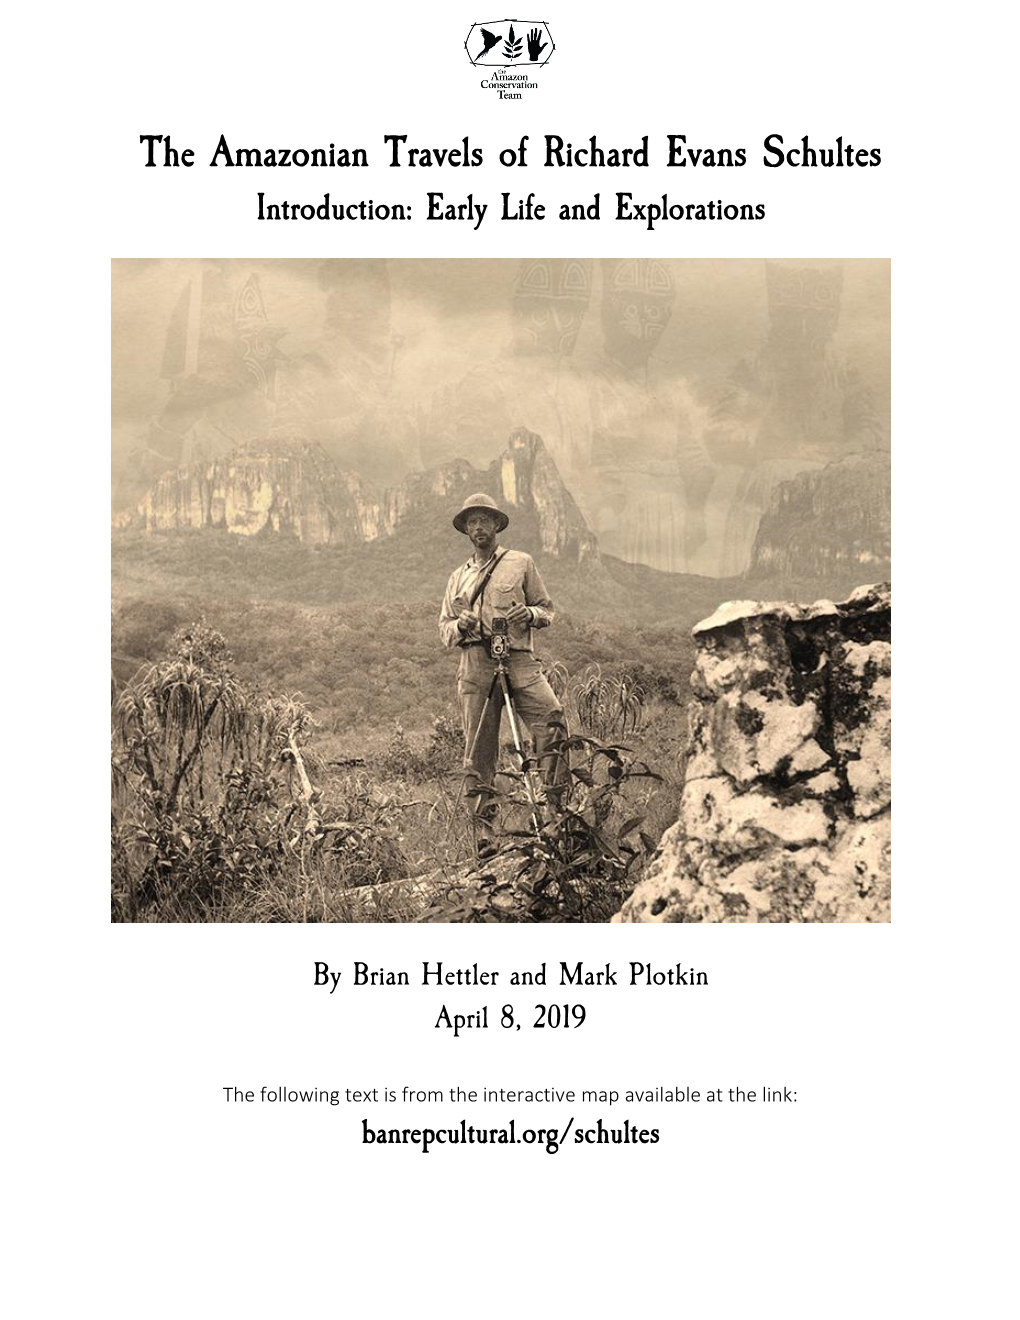 The Amazonian Travels of Richard Evans Schultes Introduction: Early Life and Explorations